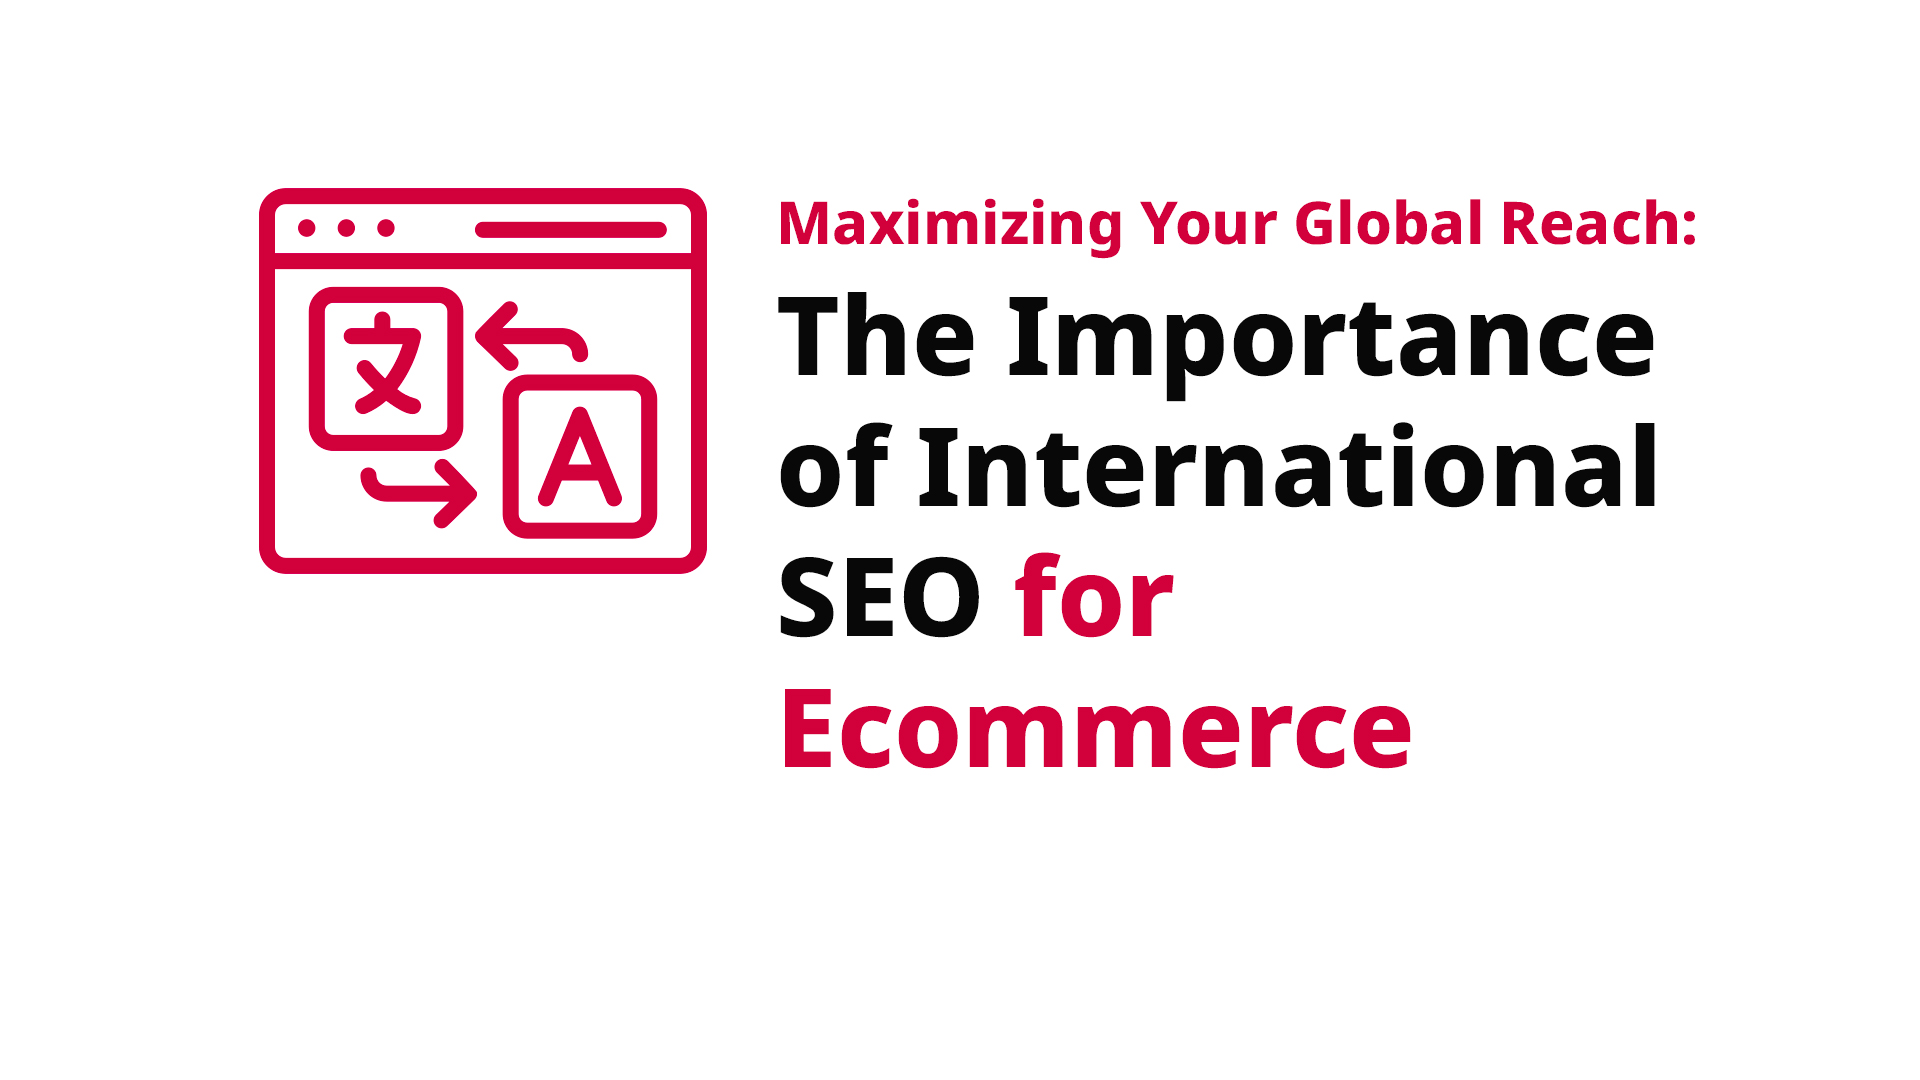 Maximizing Your Global Reach: The Importance of International SEO for Ecommerce